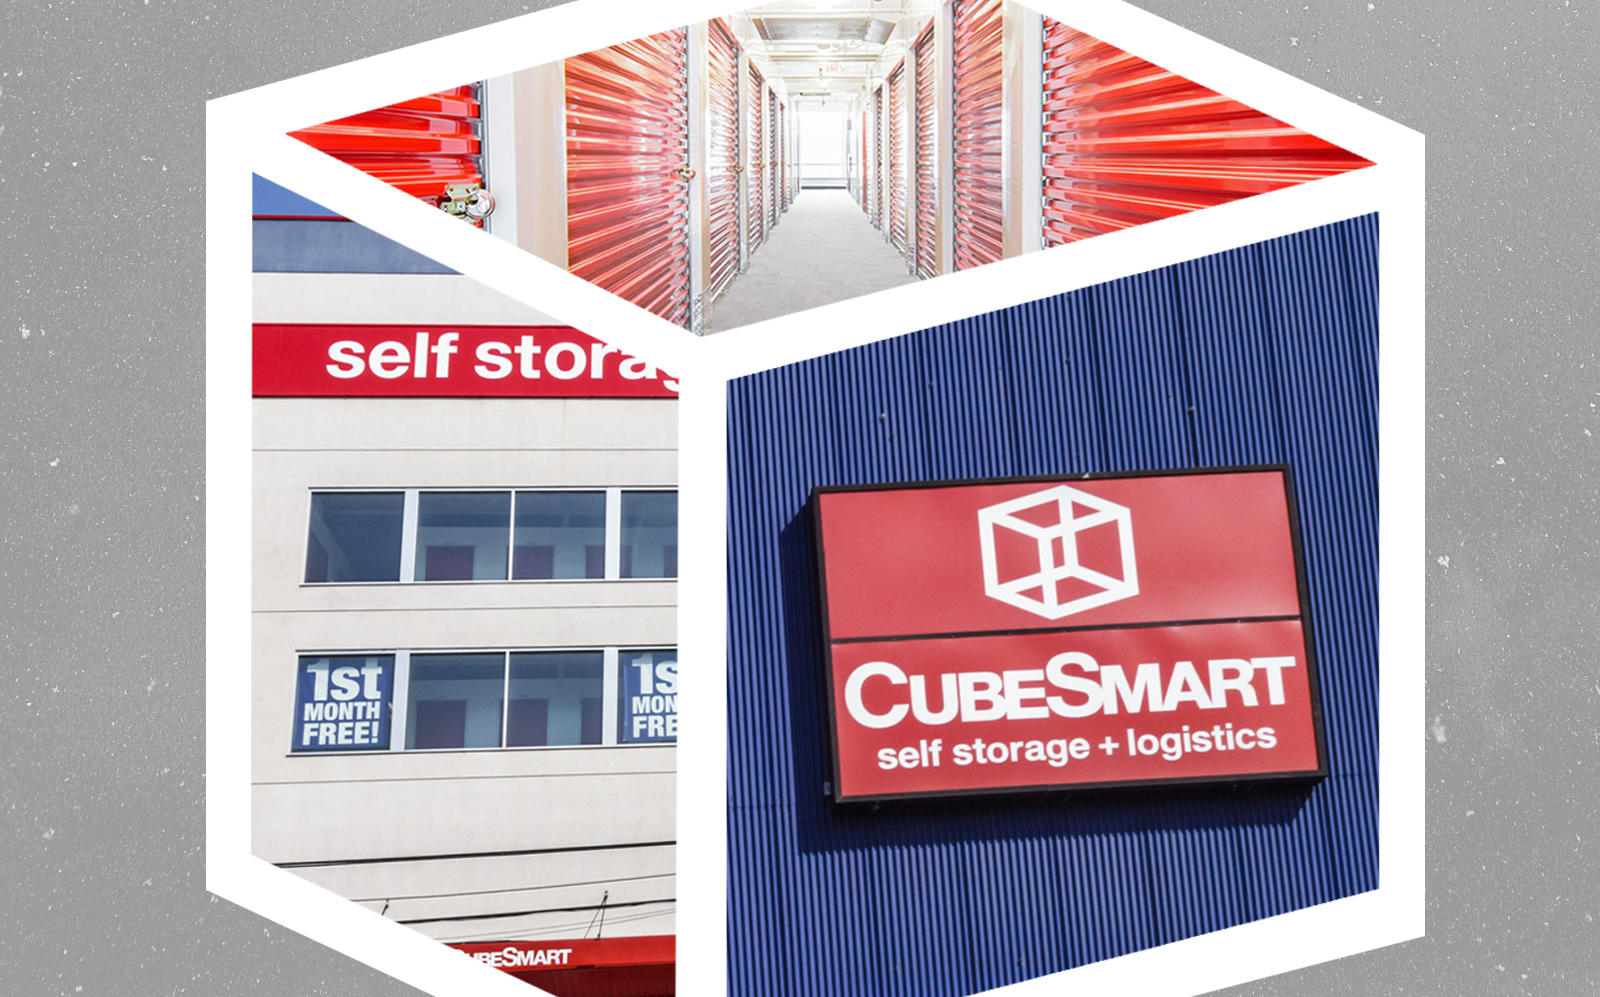 Self-storage giant closes on two building purchases and new ground lease. (Getty, CubeSmart)